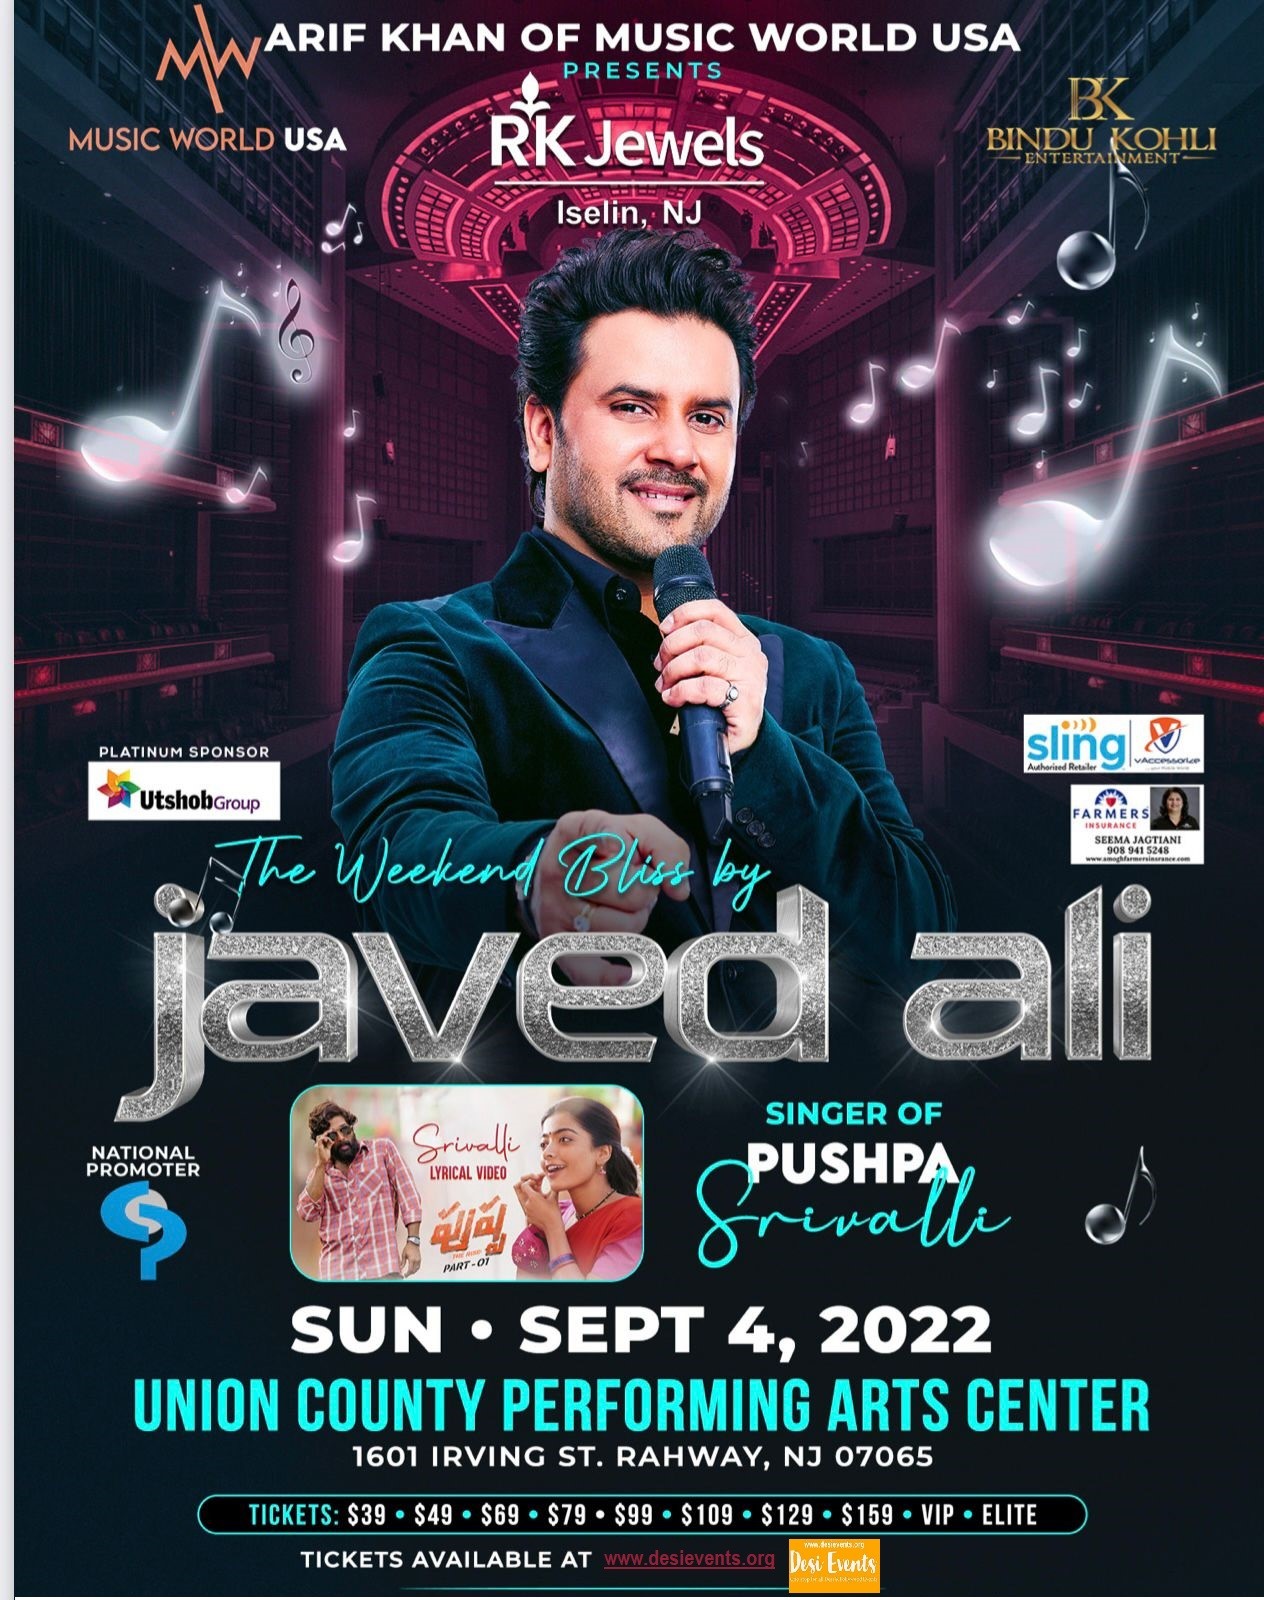 Javed Ali Live Concert Union County Center NJ 2022 September, 4, 2022 AT UNION COUNTY PERFORMING ART CENTER 1601 IRVING ST. RA on sep. 04, 19:00@Union county center - Buy tickets and Get information on Desi Events desievents.org